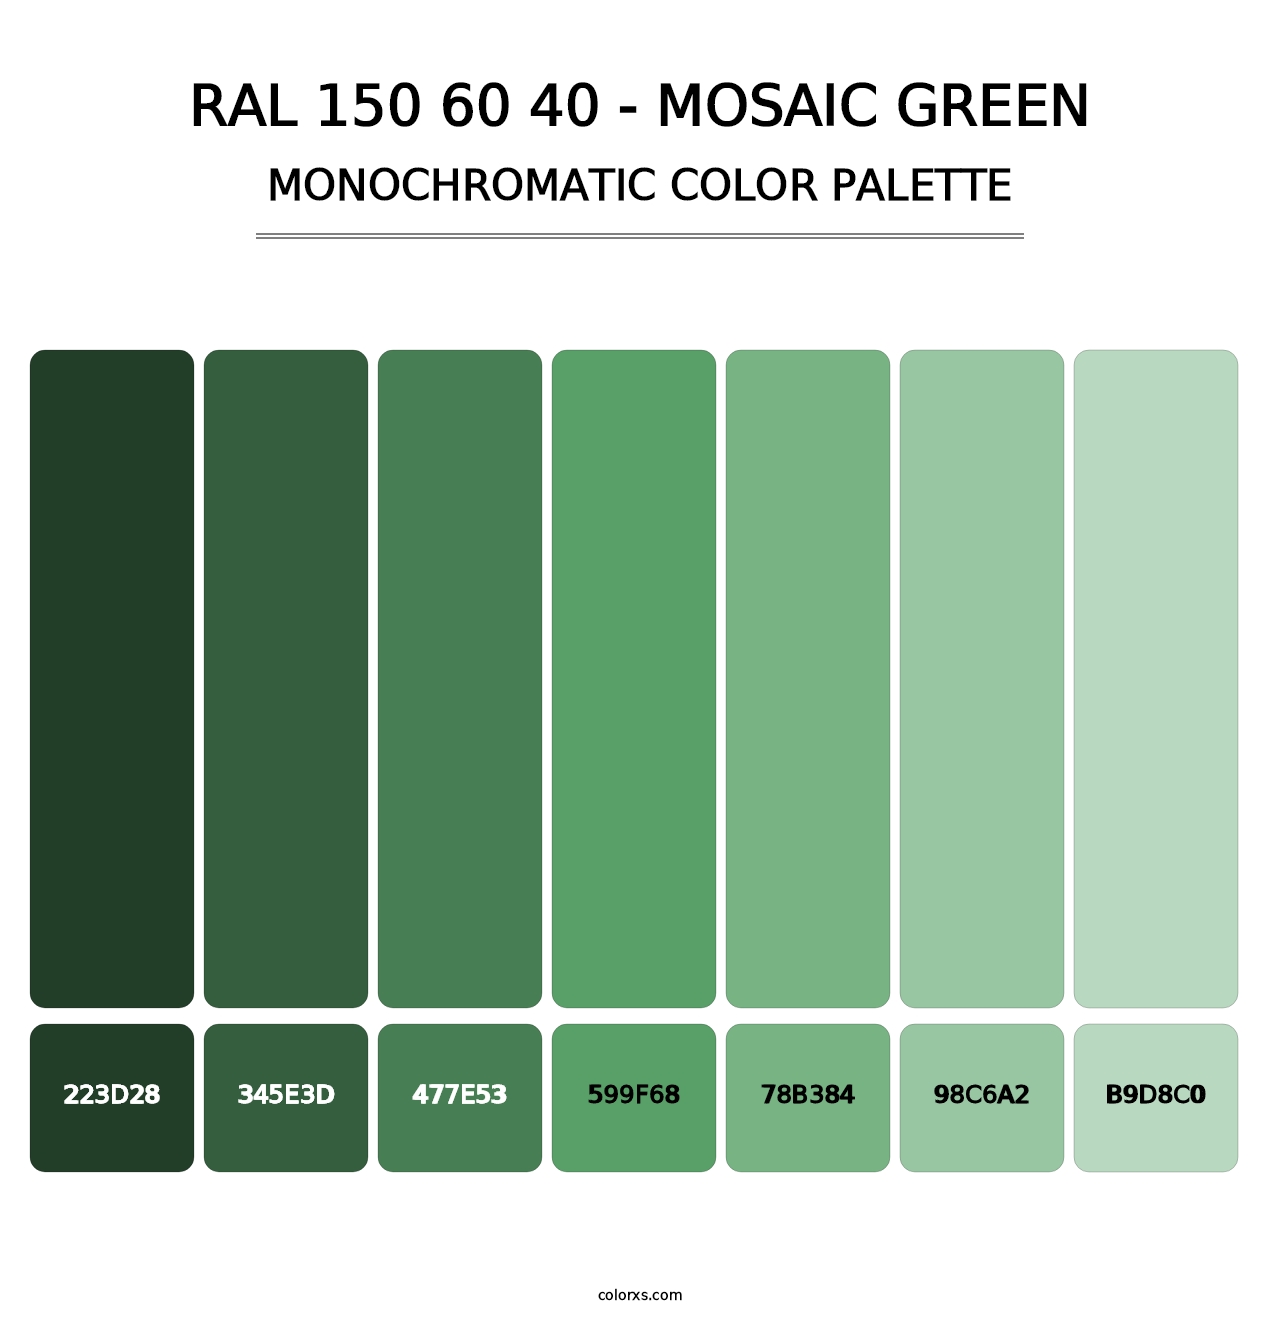 RAL 150 60 40 - Mosaic Green - Monochromatic Color Palette